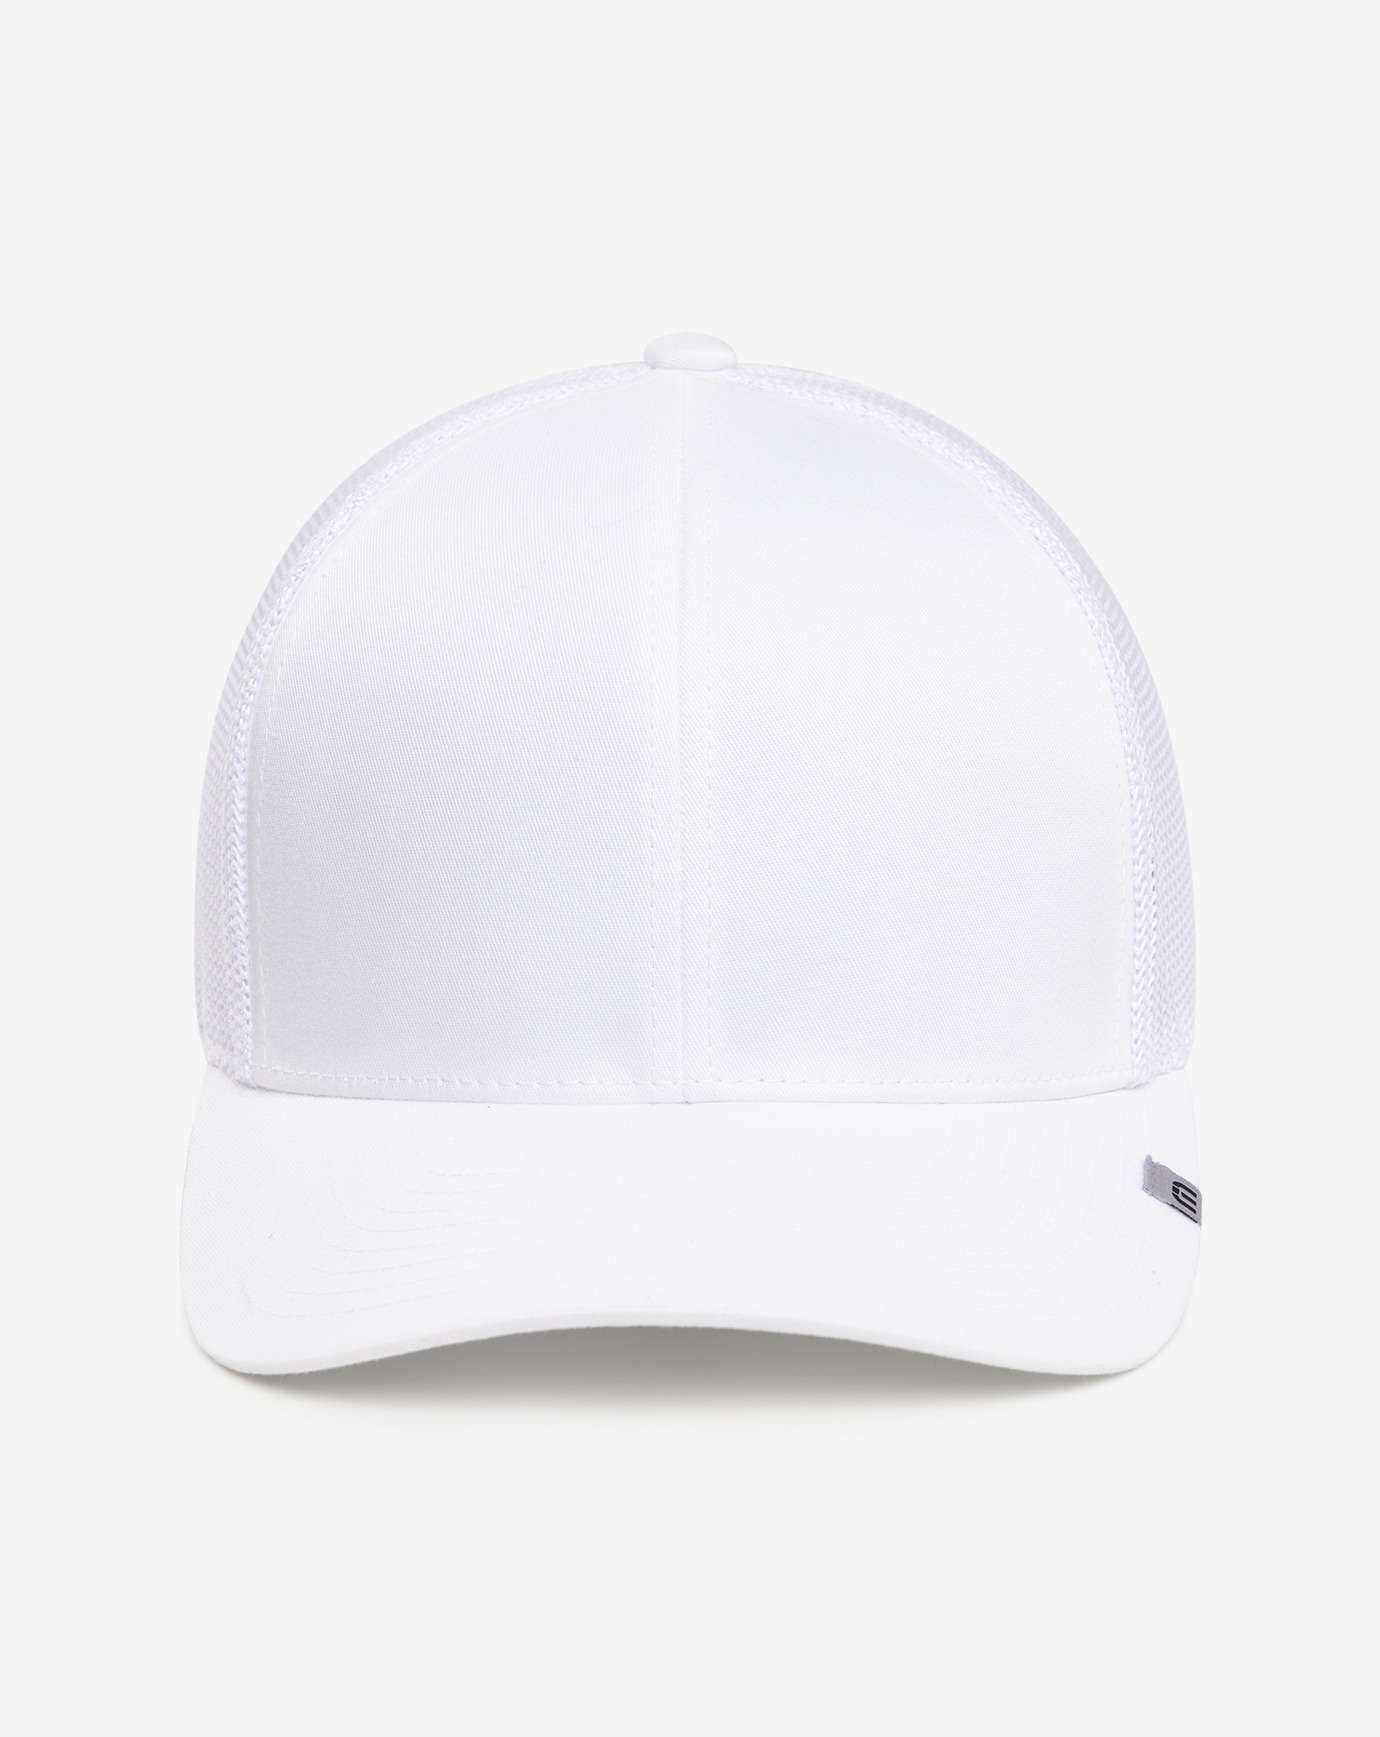 Related Product - WIDDER 2.0 SNAPBACK HAT